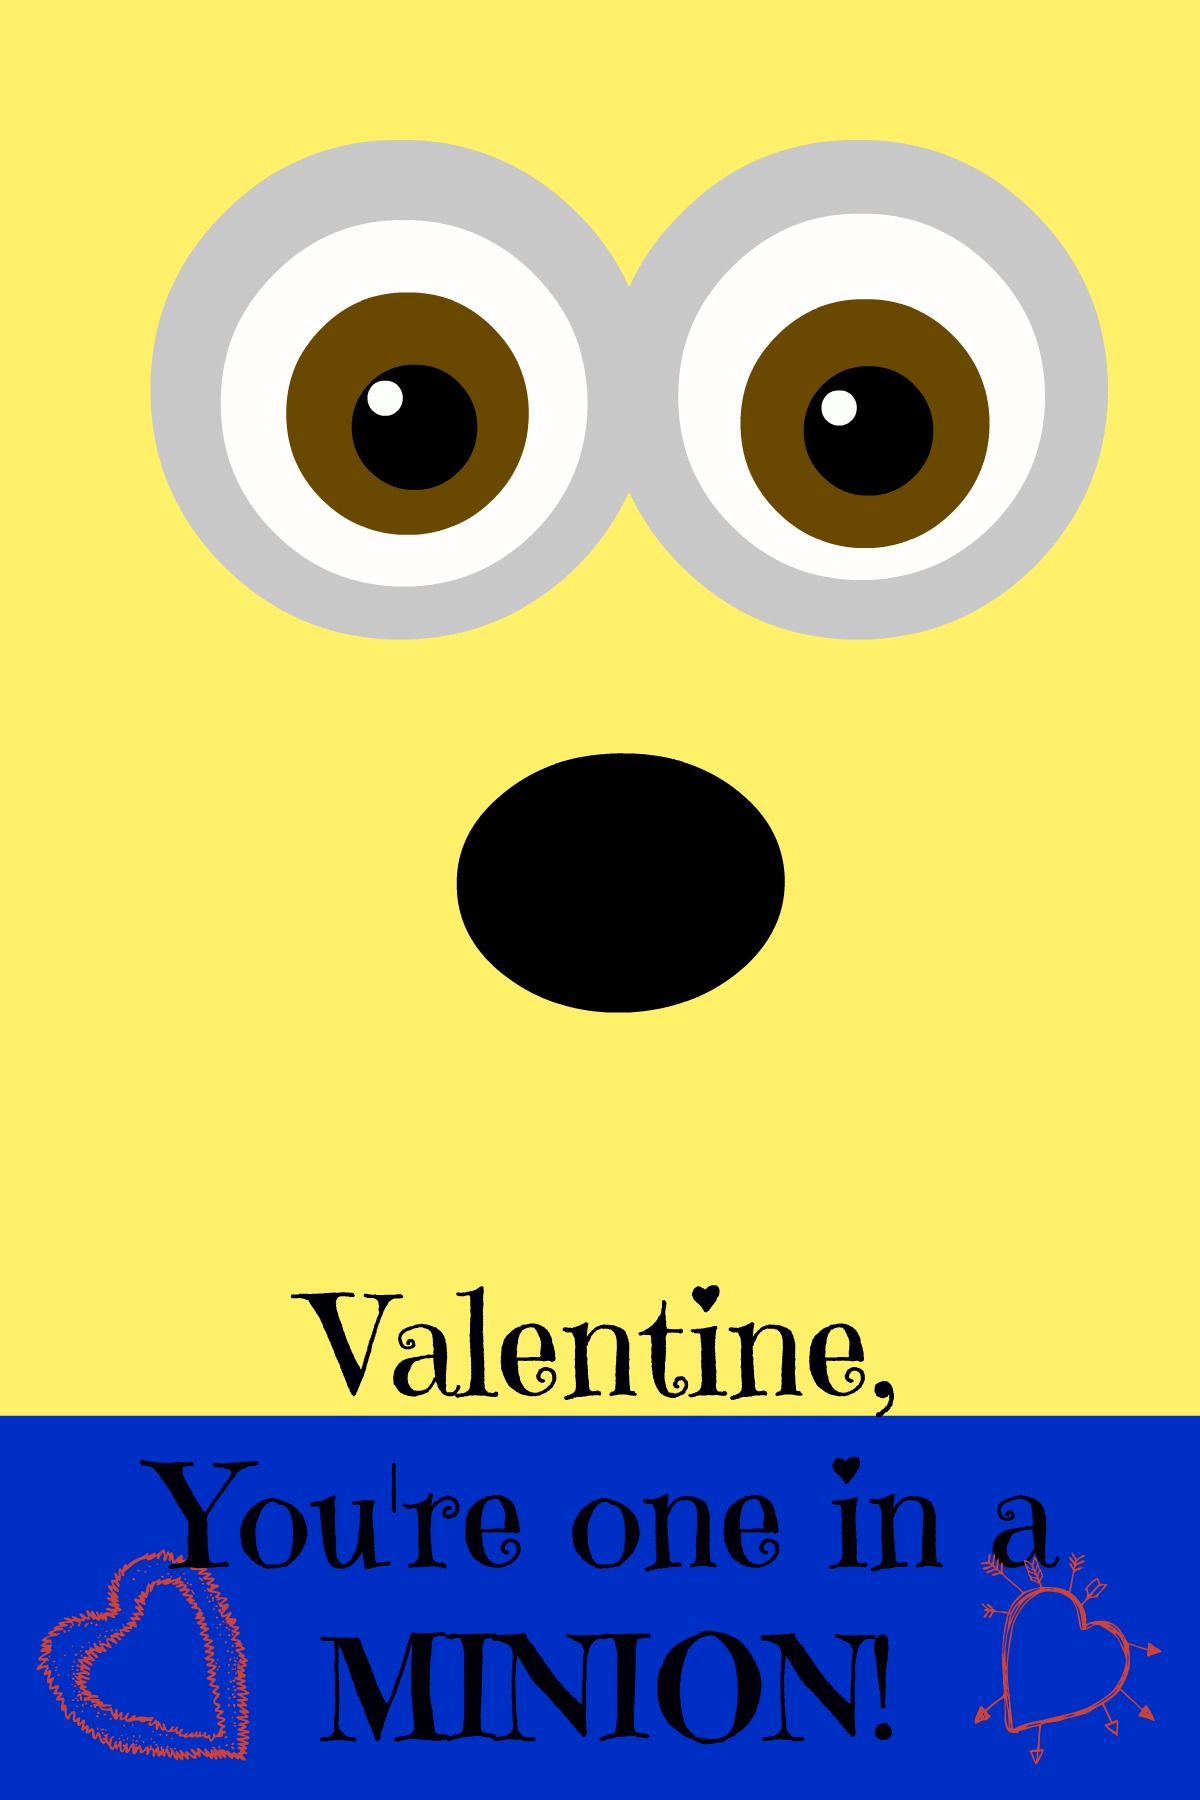 Printable Minion Valentines Free Printable A Thrifty Mom Recipes Crafts Diy And More